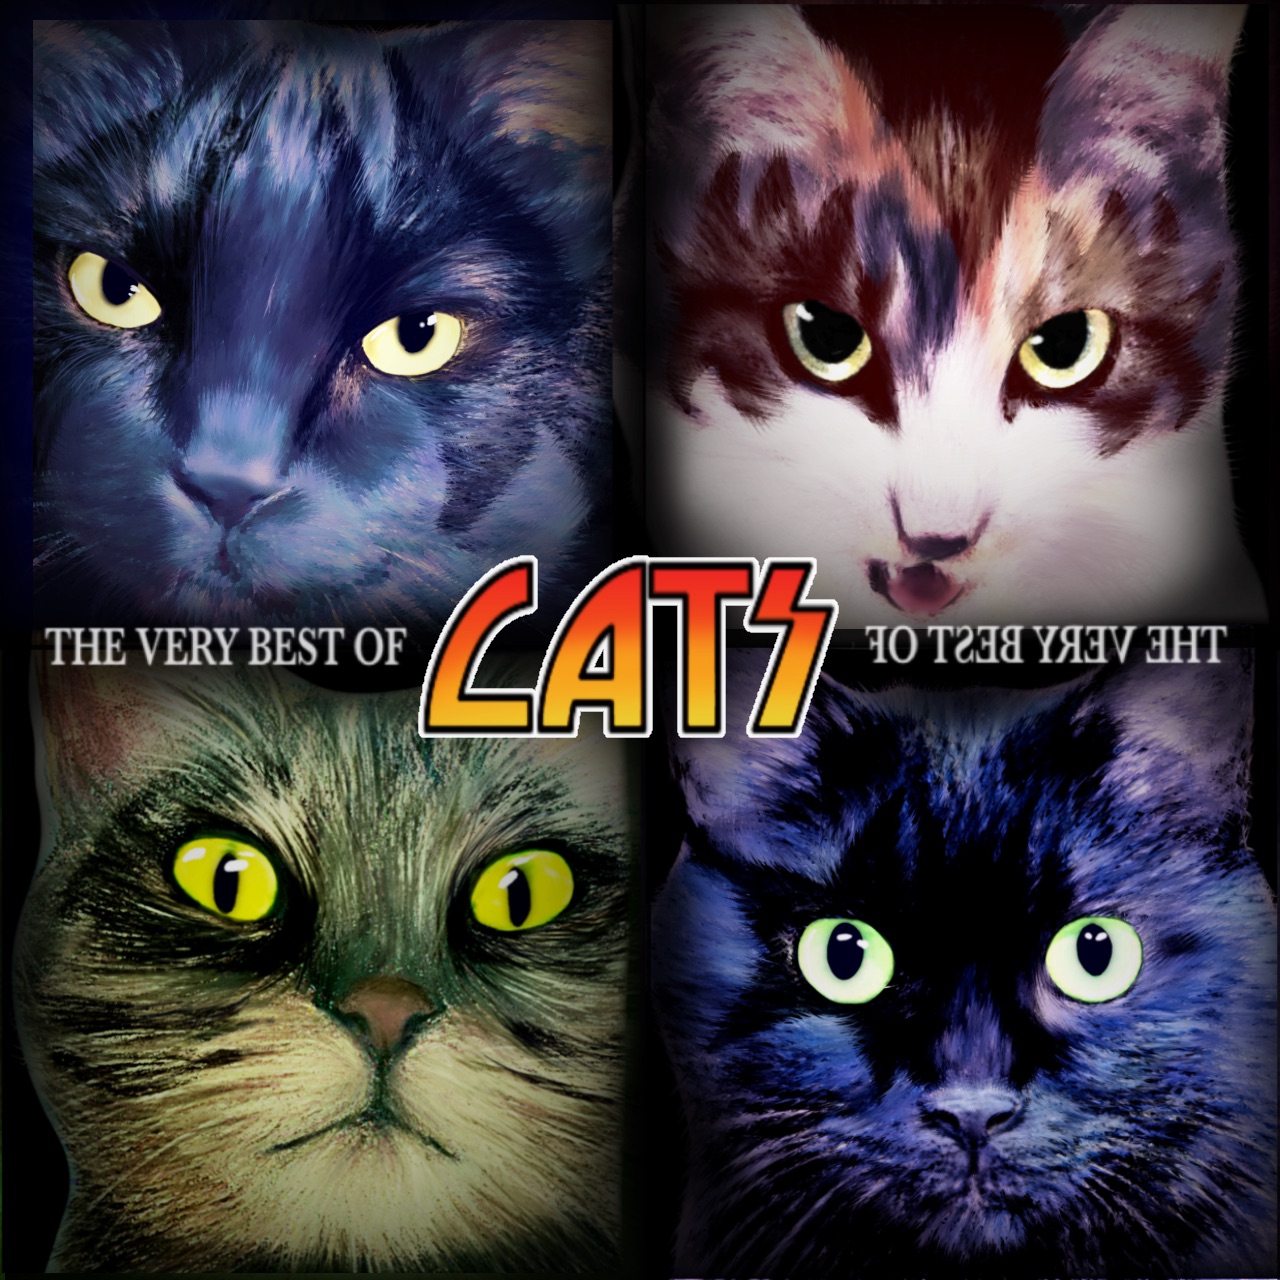 THE VERY BEST OF CATS